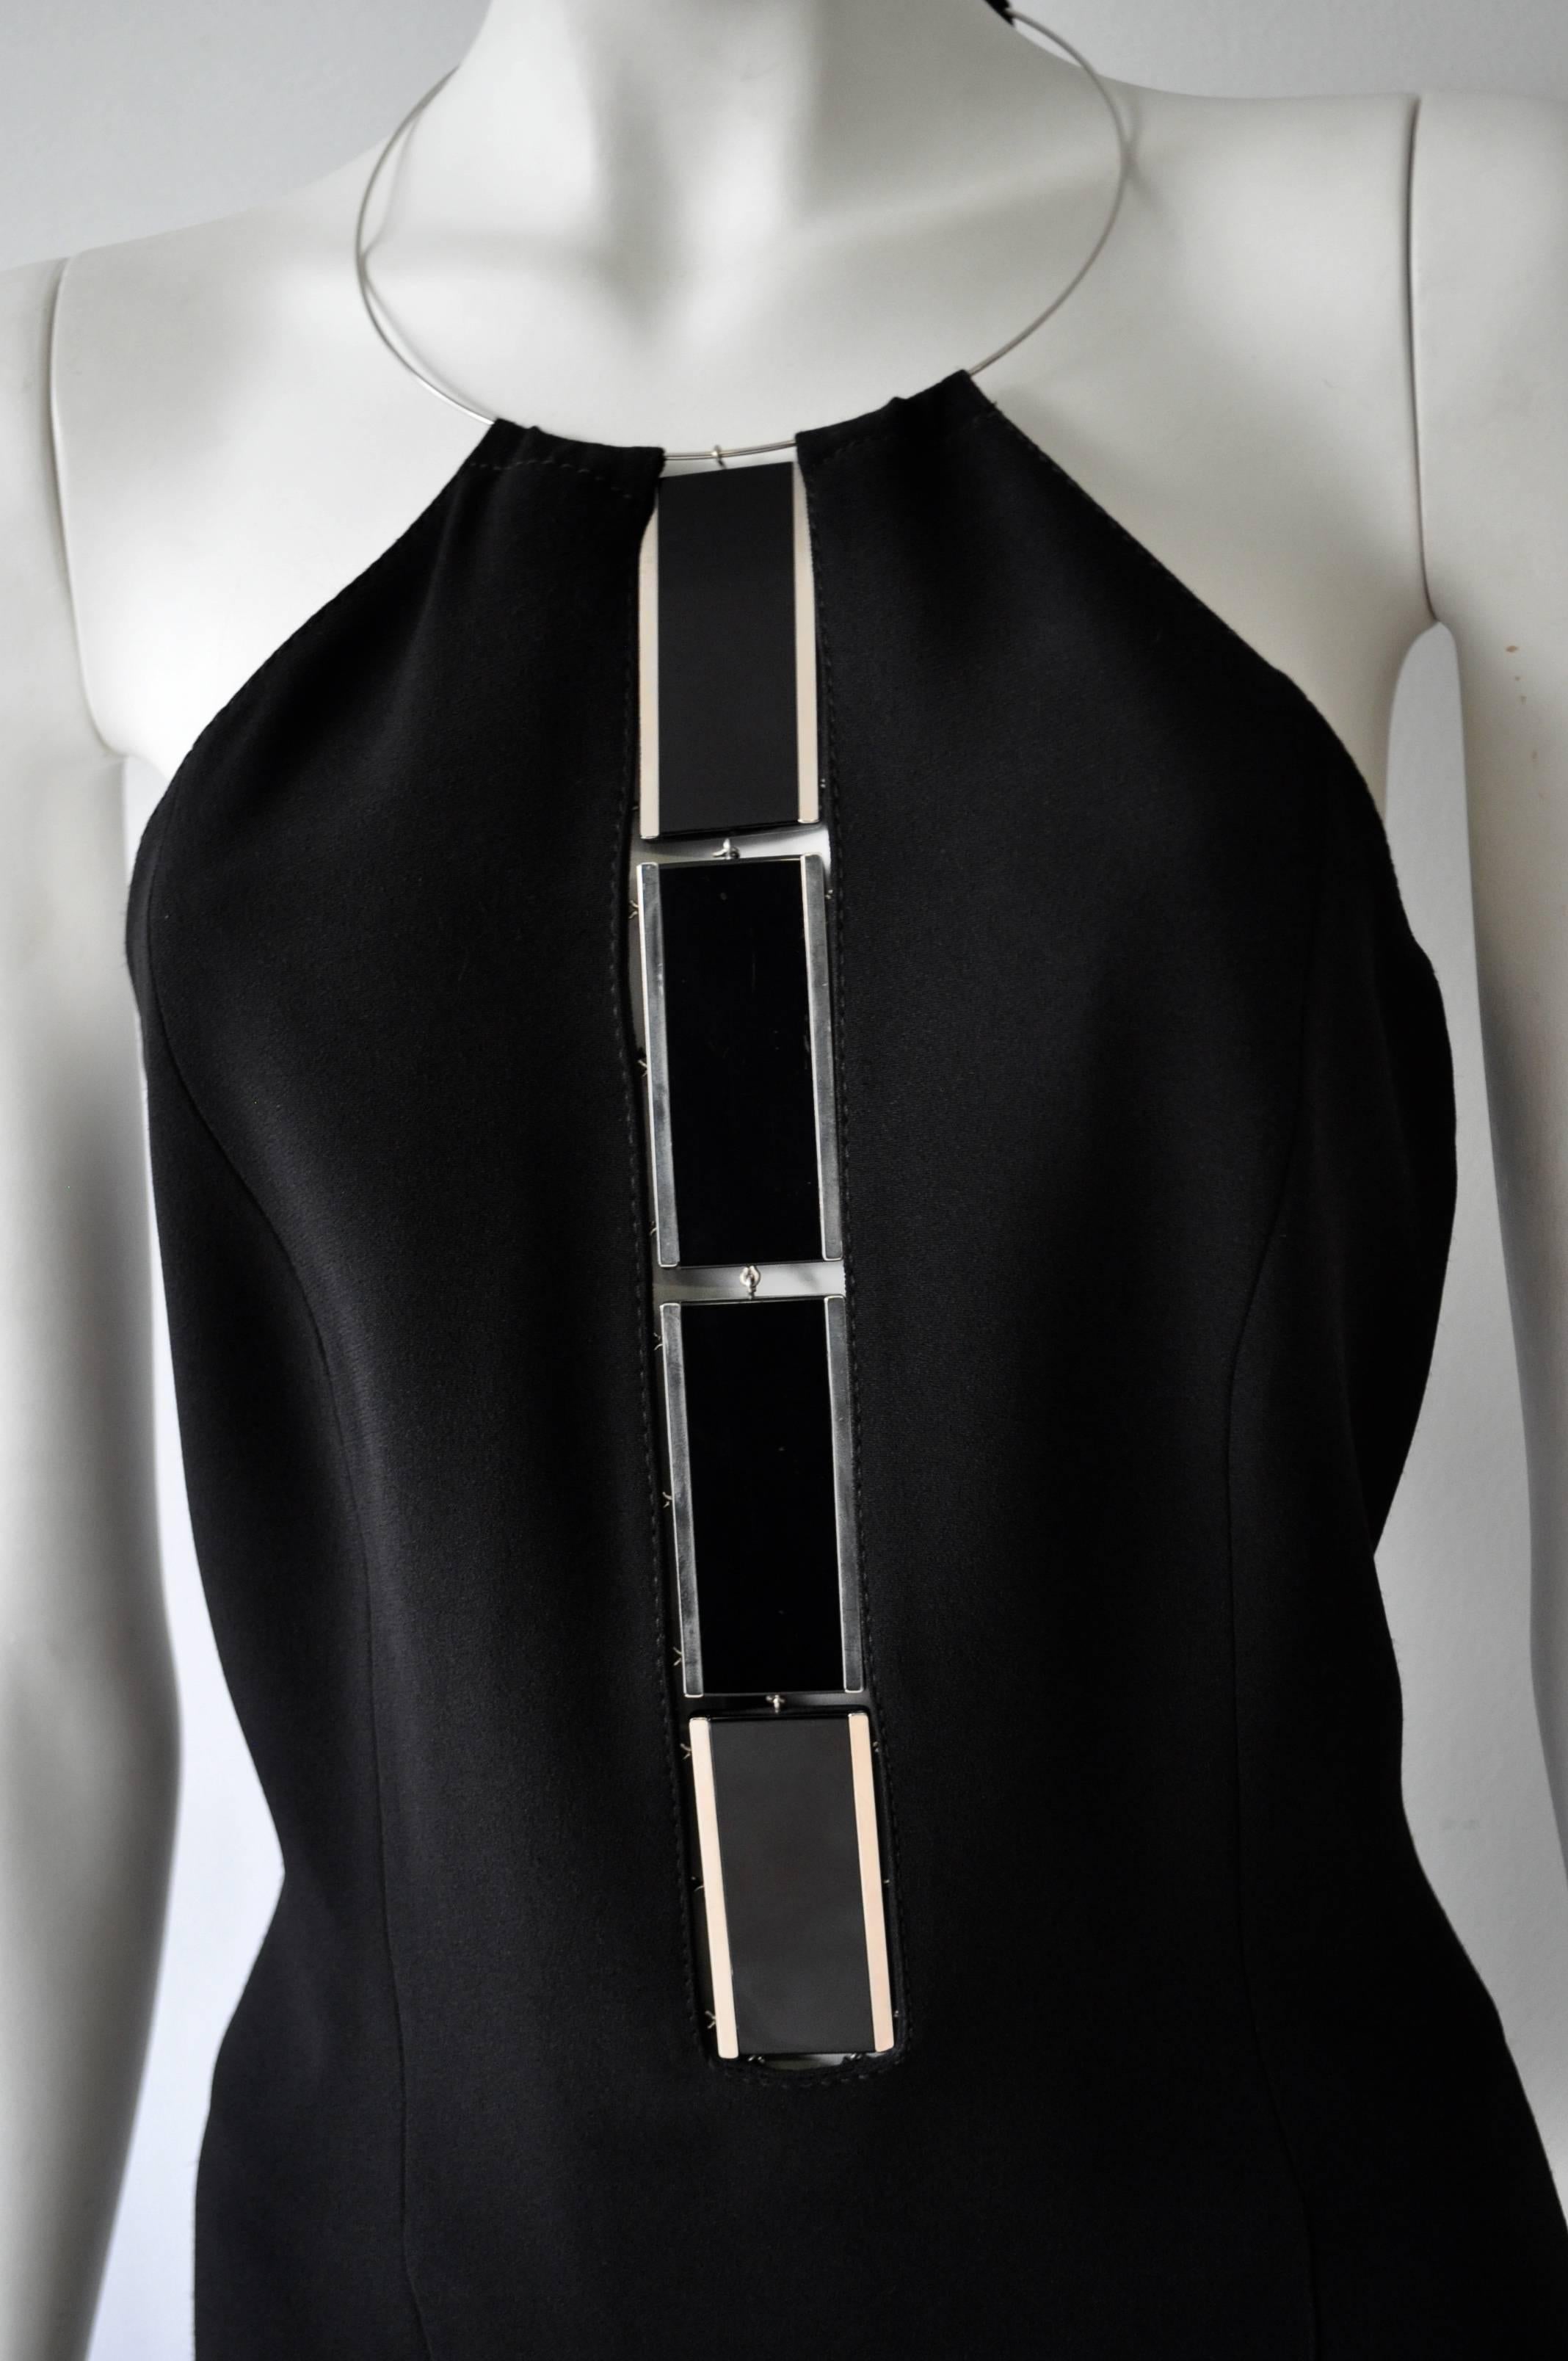 Mod Angelo Mozzillo Black Mini Cocktail Dress Featuring Unique Round Metal Collar Necklace Connecting Geometric Hardware Breast Plaque.